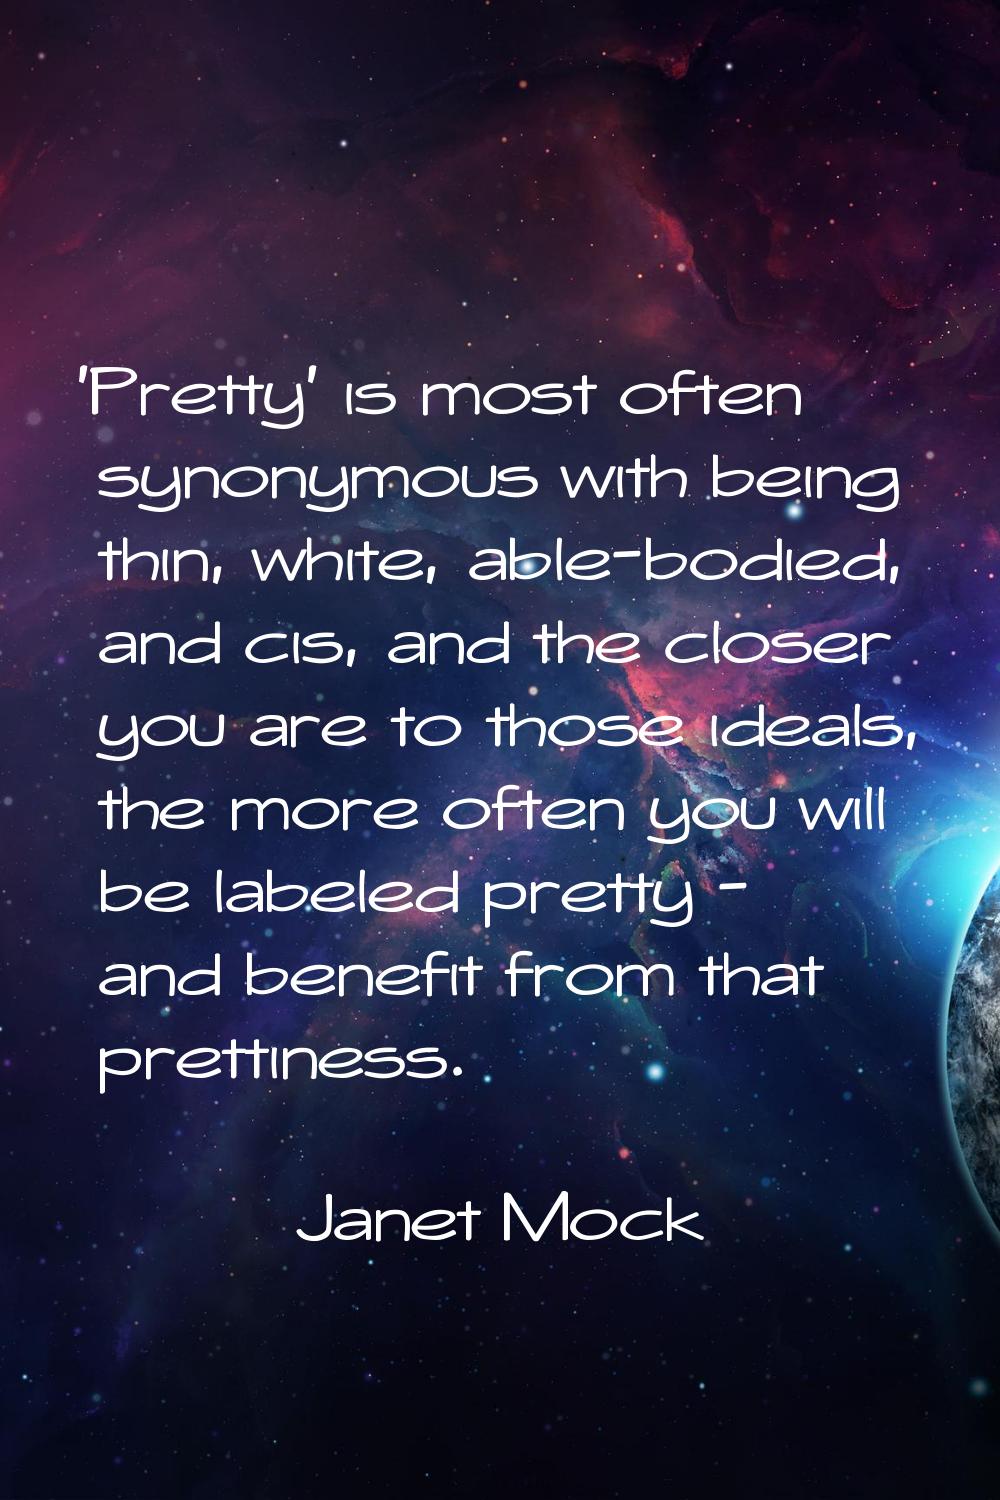 'Pretty' is most often synonymous with being thin, white, able-bodied, and cis, and the closer you 